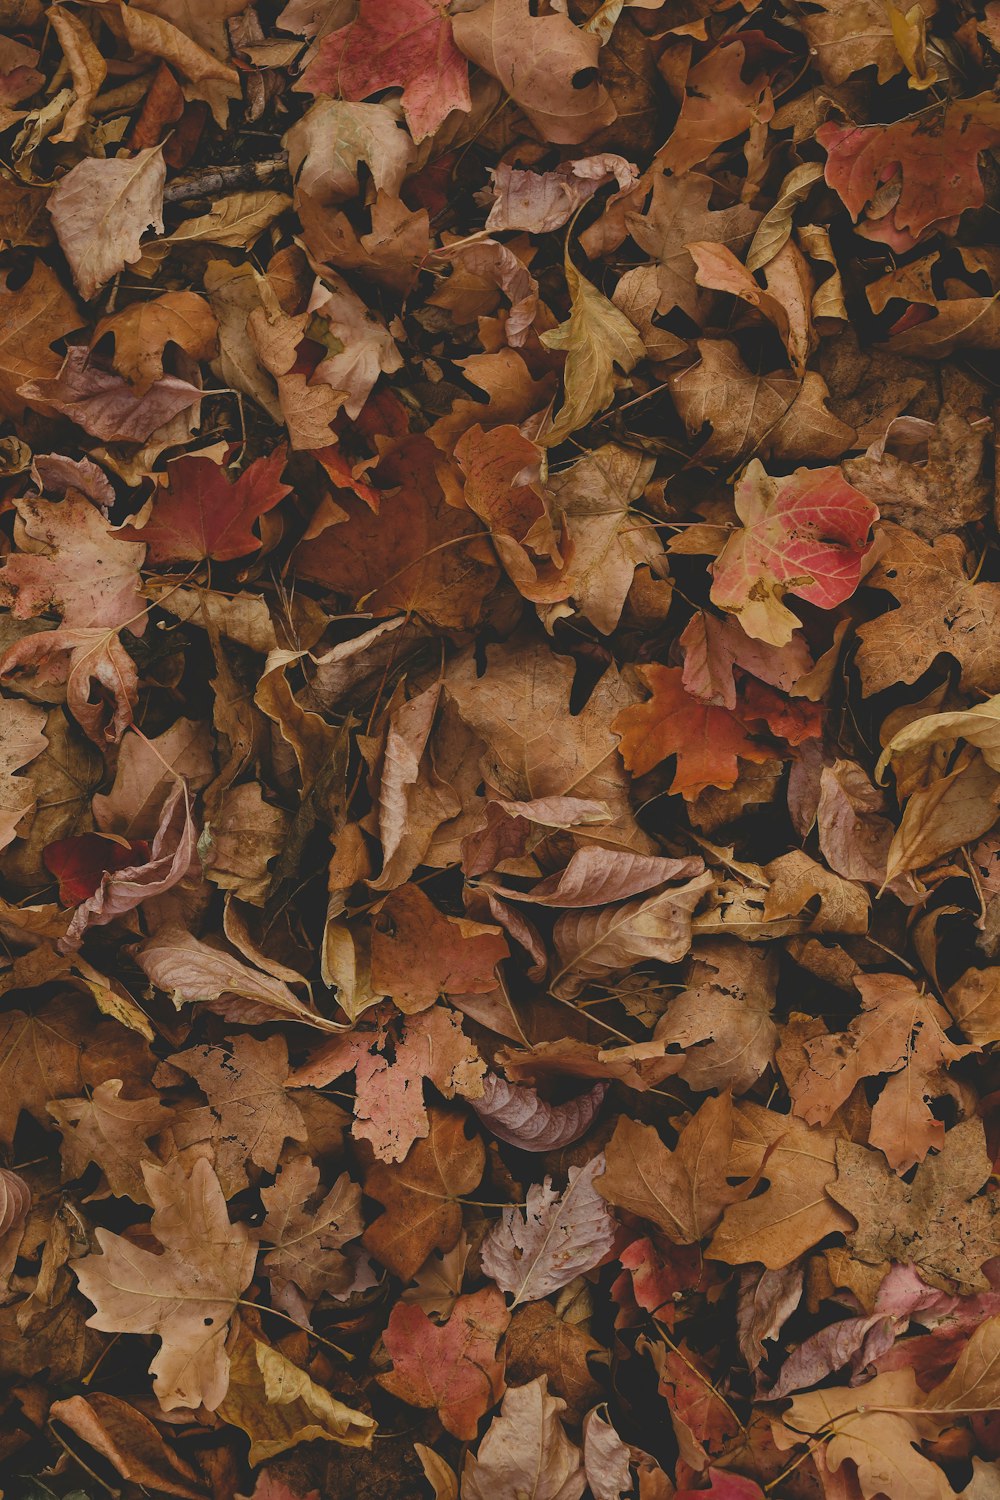 red and brown leaves on ground